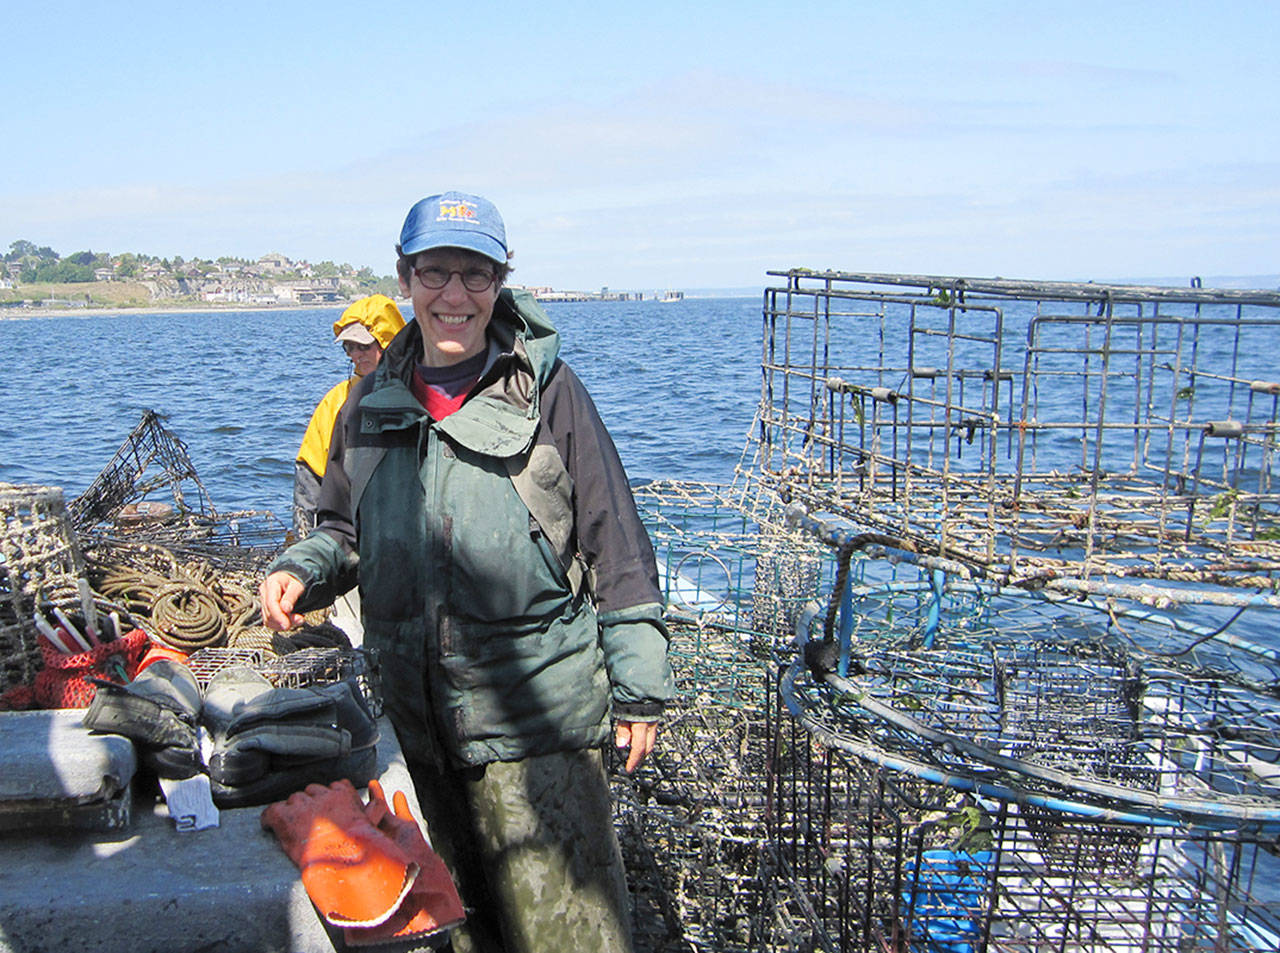 Cheryl Lowe of the Jefferson Marine Resources Committee after a successful trip cleaning up derelict crab pots. Photo by Paul Ruddell